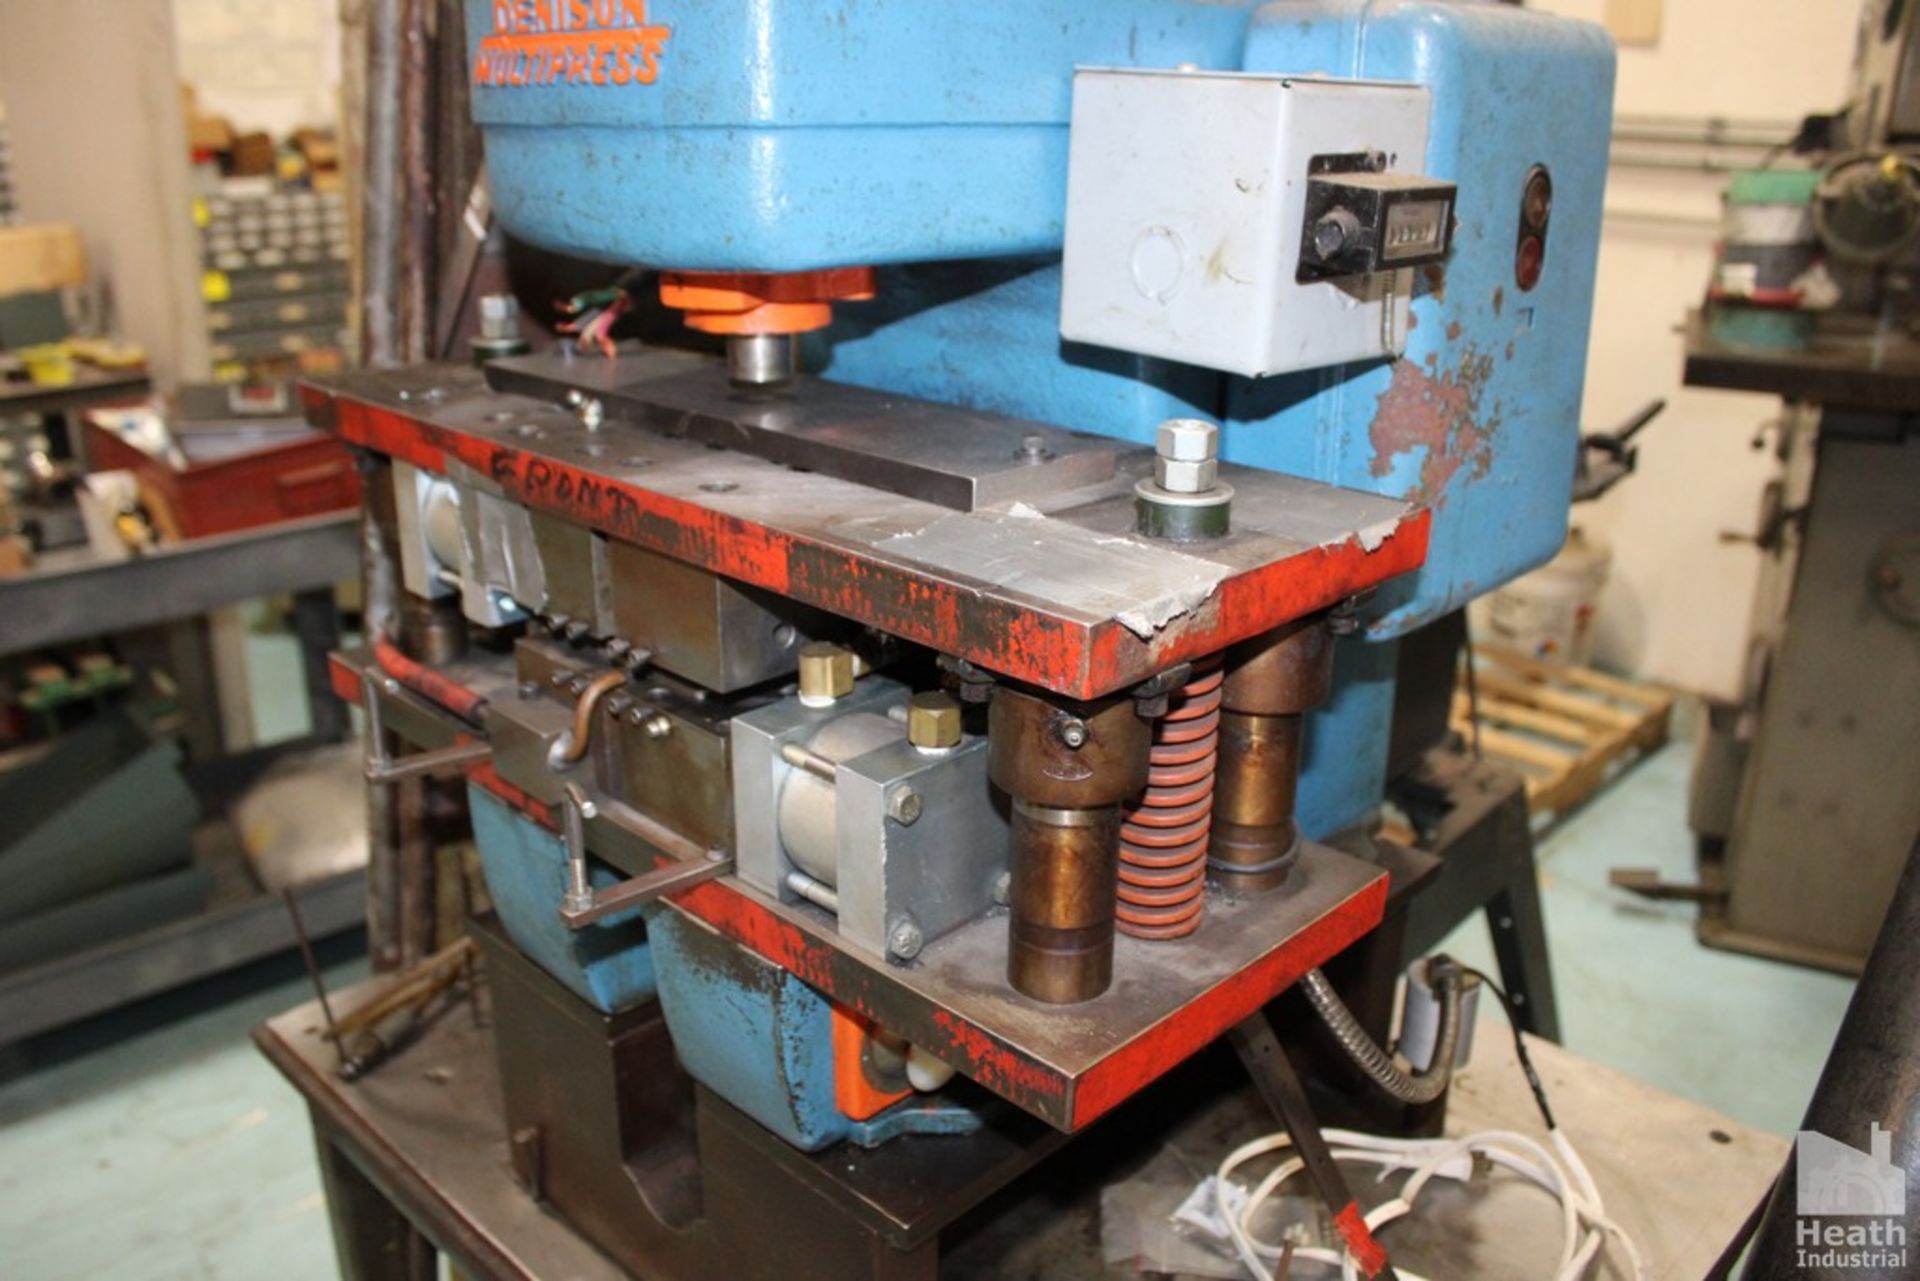 DENISON MULTIPRESS HYDRAULIC PRESS WITH STAND - Image 4 of 5